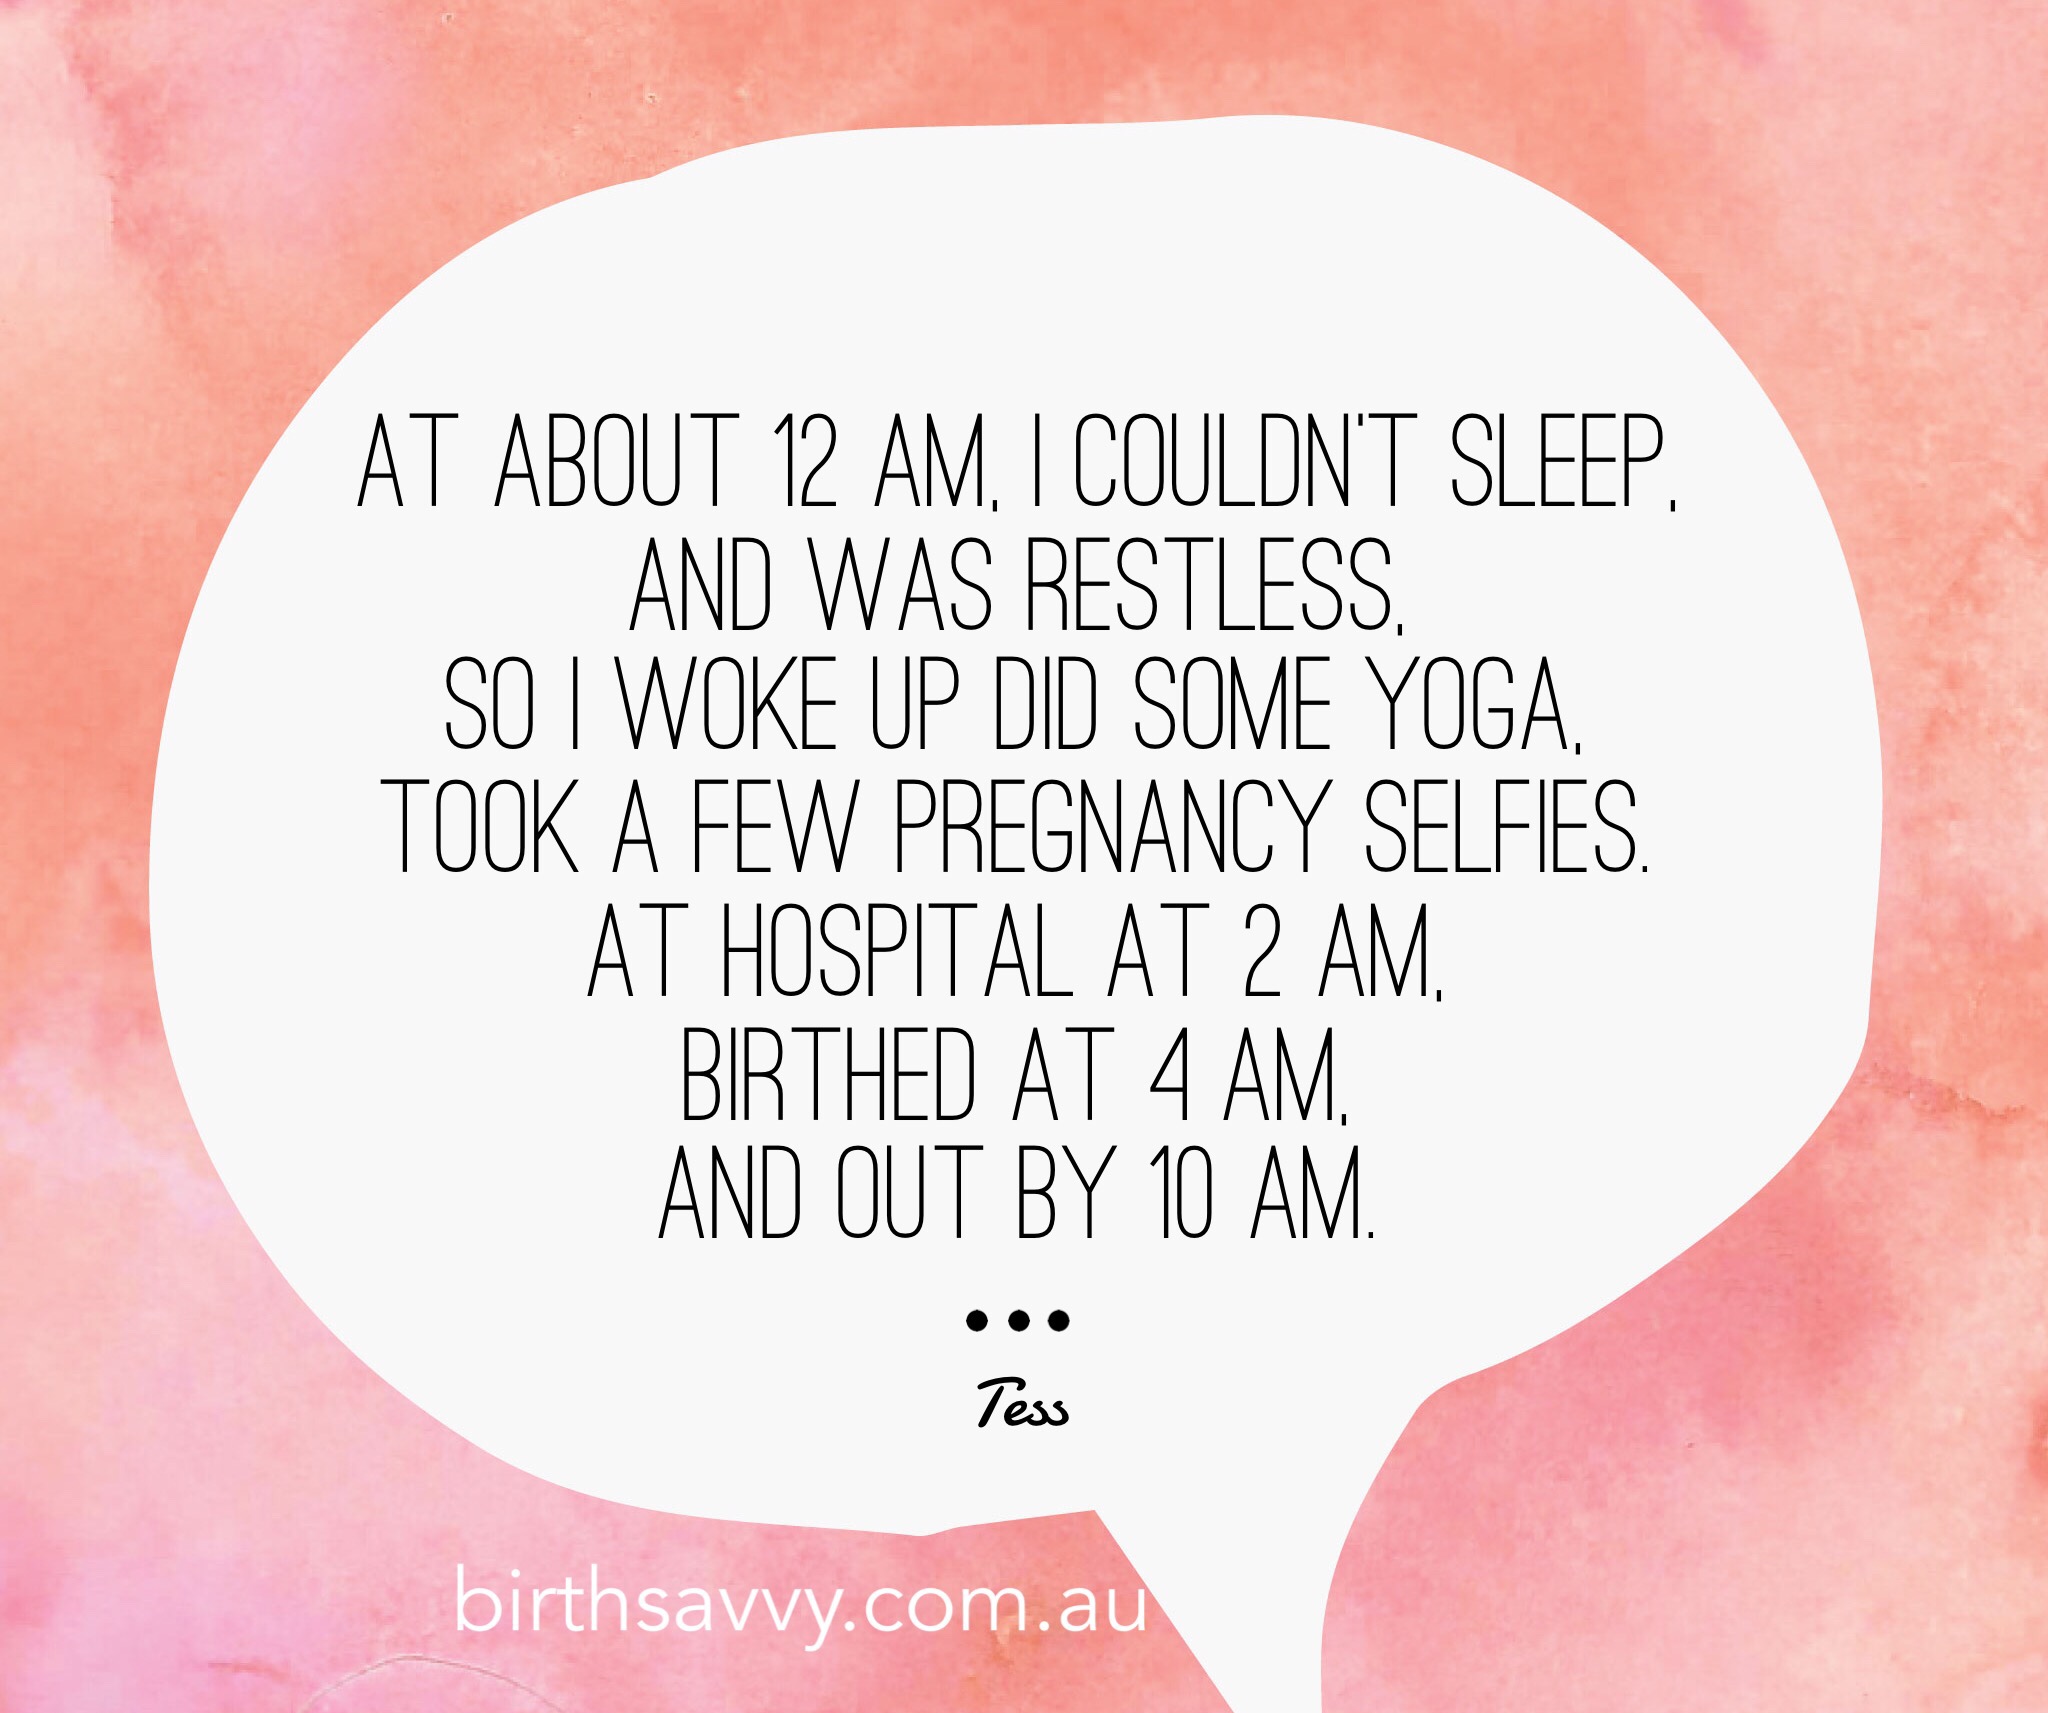 Pregnancy Selfies, Dancing and Hypnobirthing